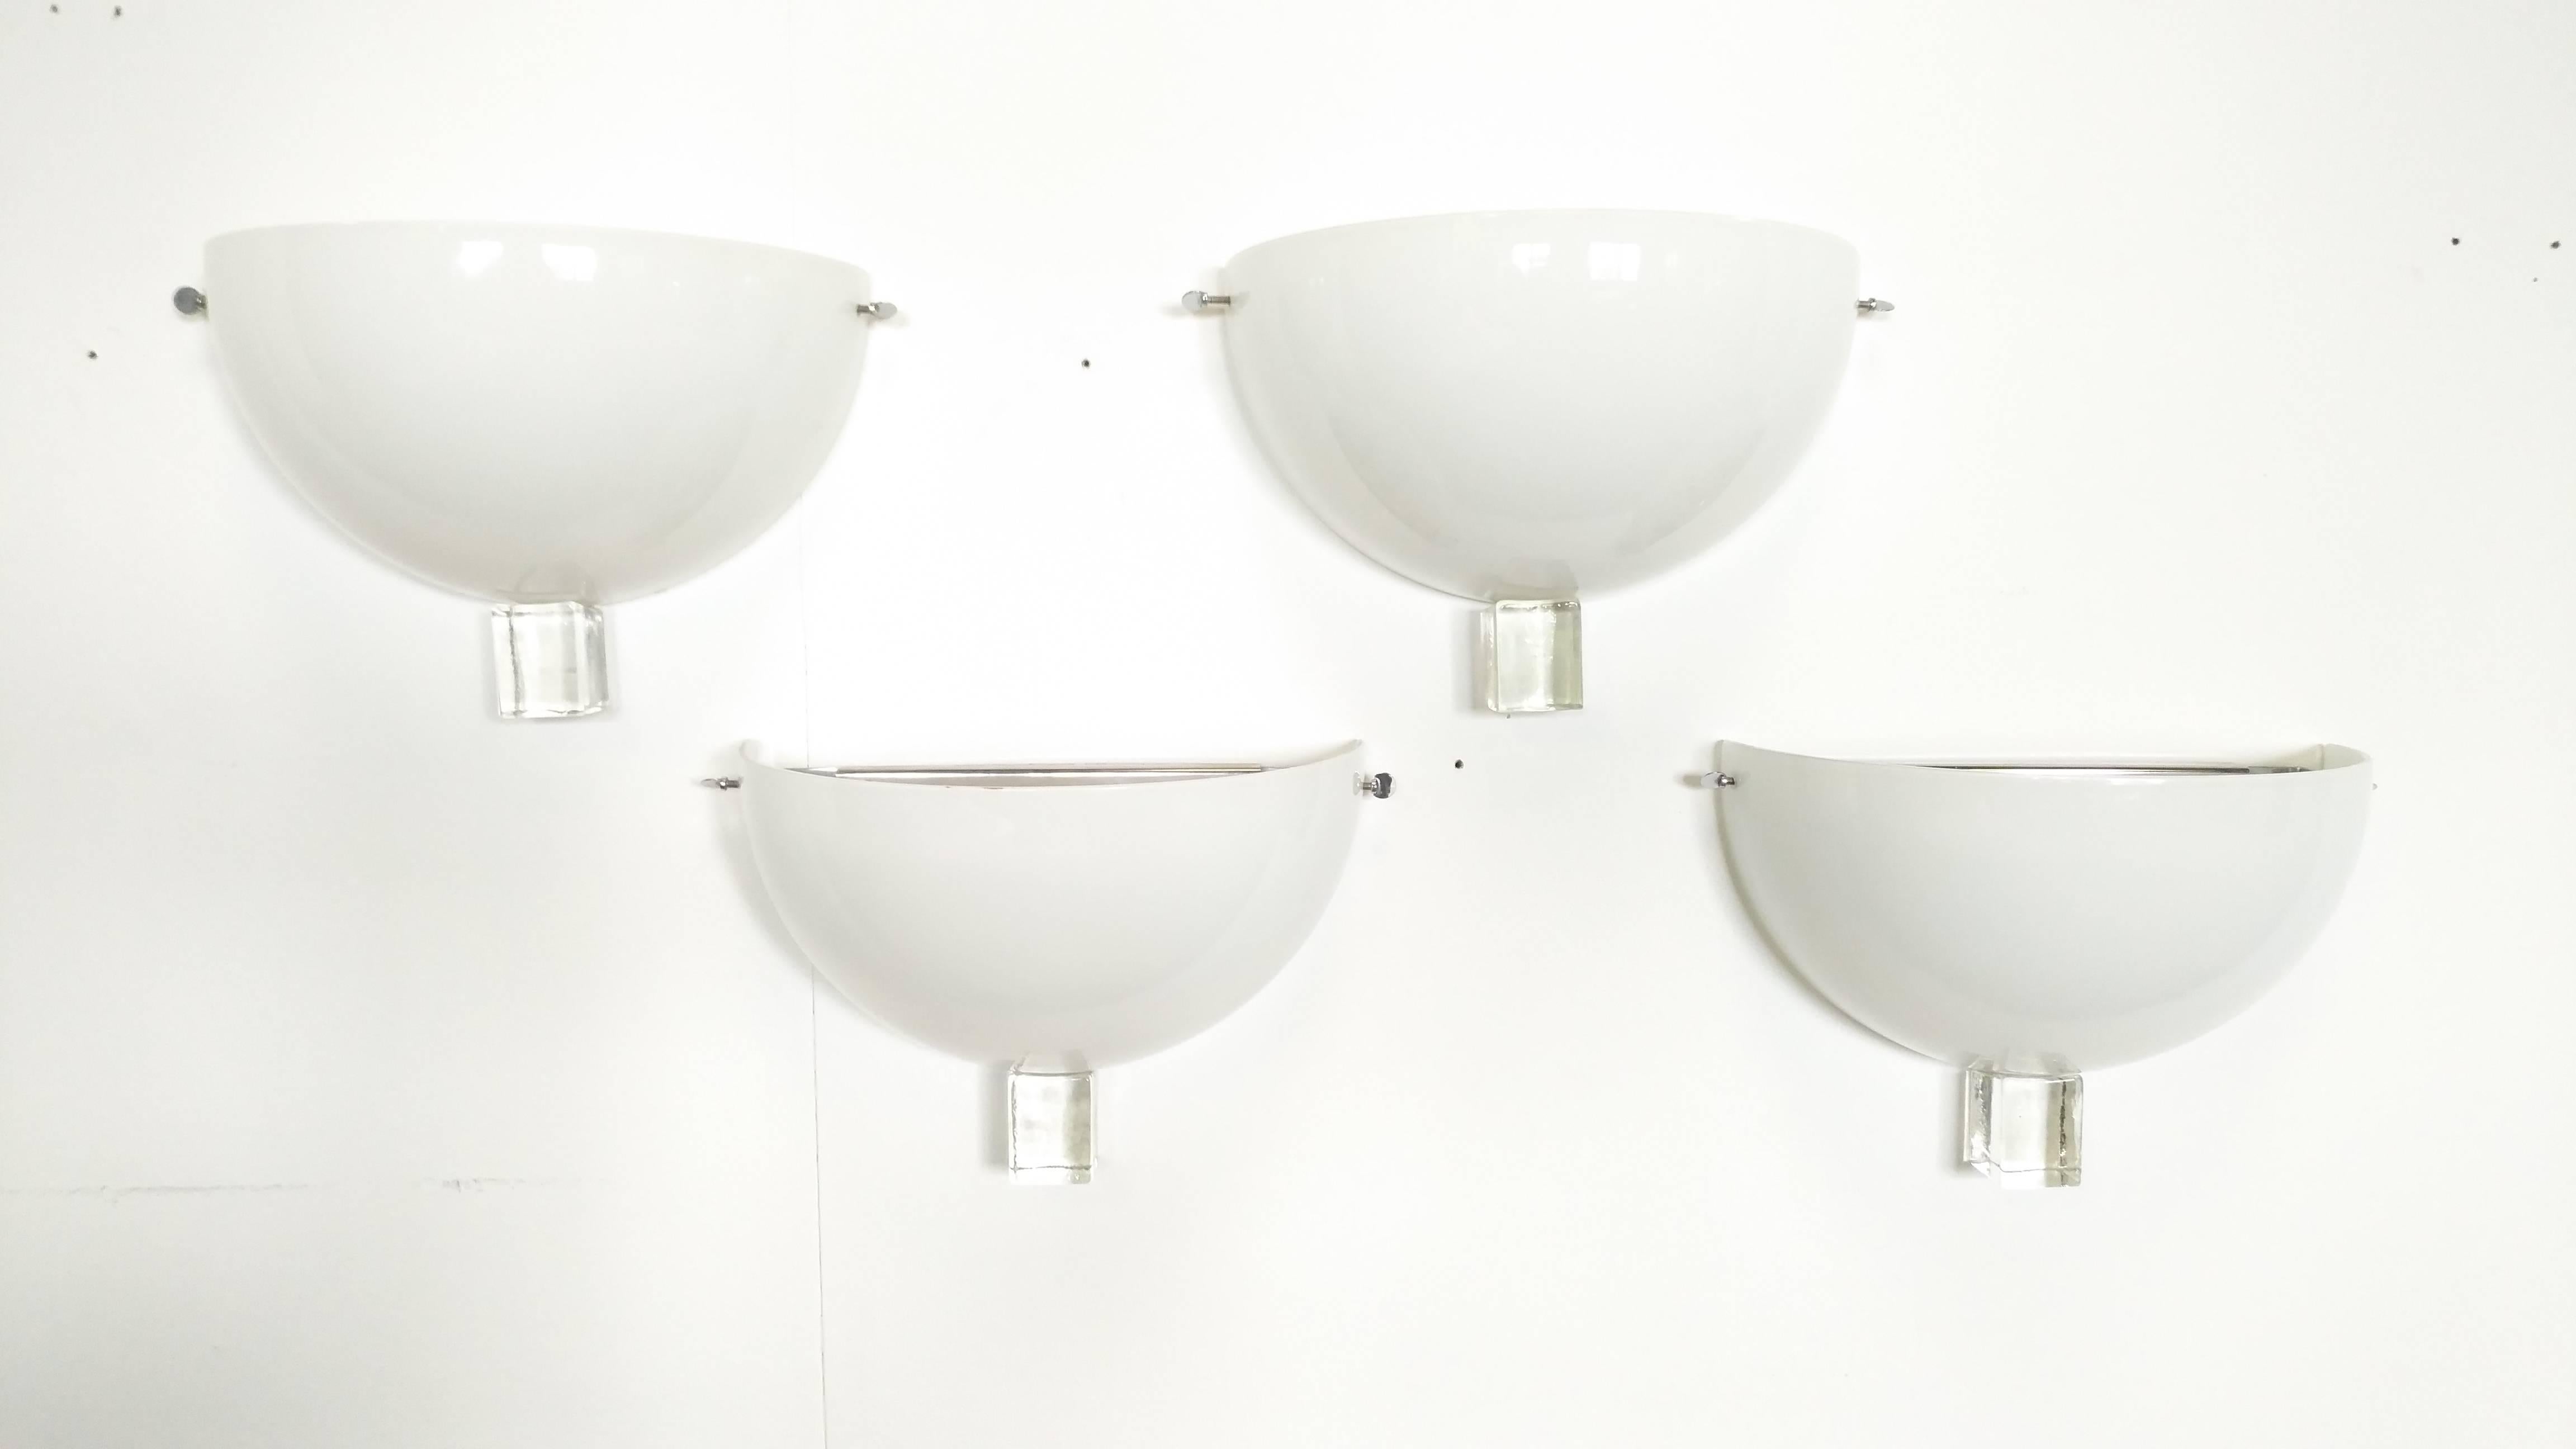 Set of four sconces by Venini , 1987, white opaline glass and metal structure, signed at the cube glass base.